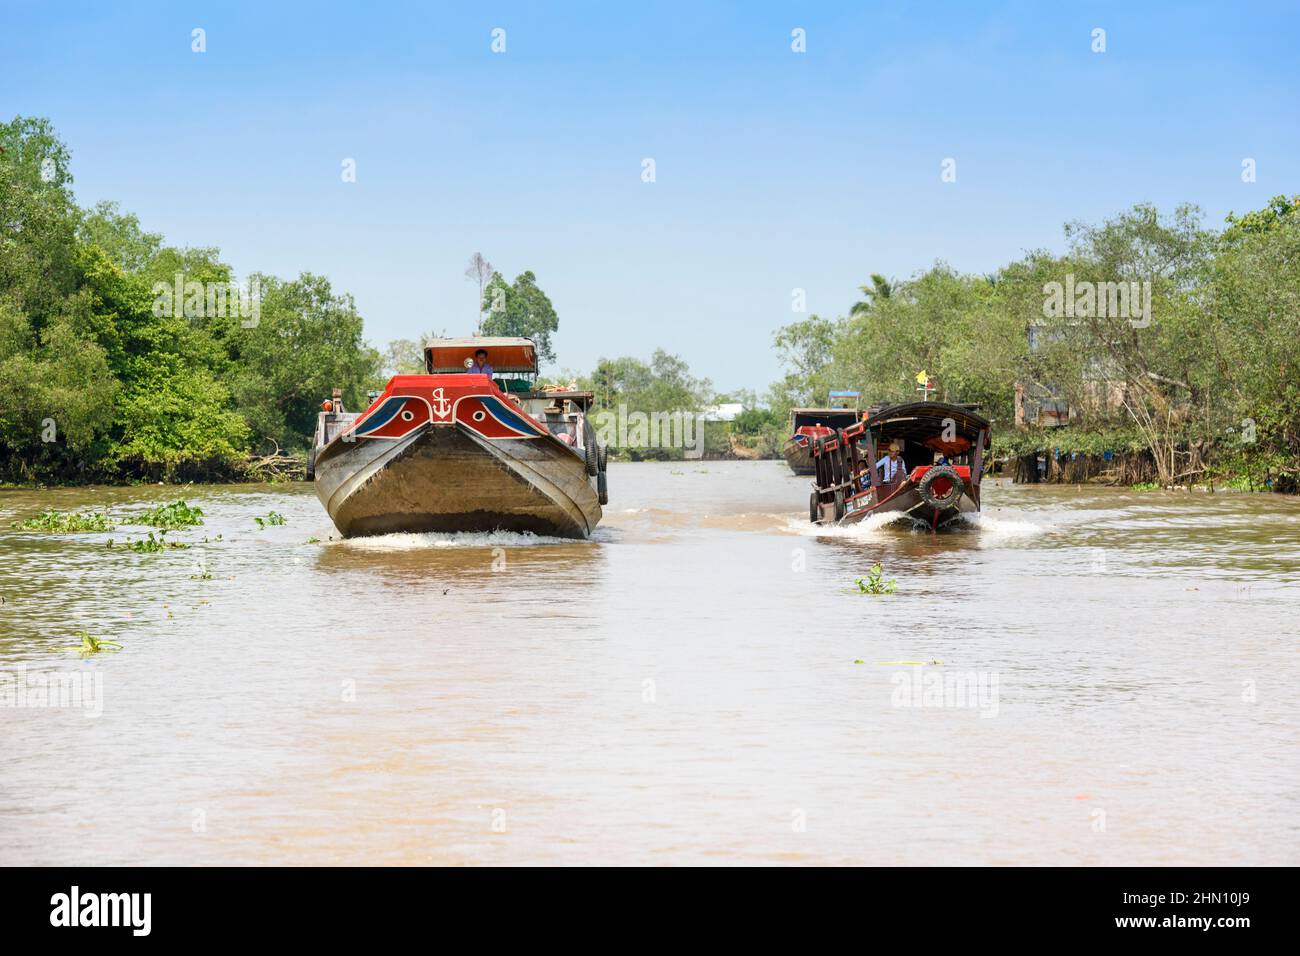 Traditional Wooden Boats On The Mekong River Are Painted With Red